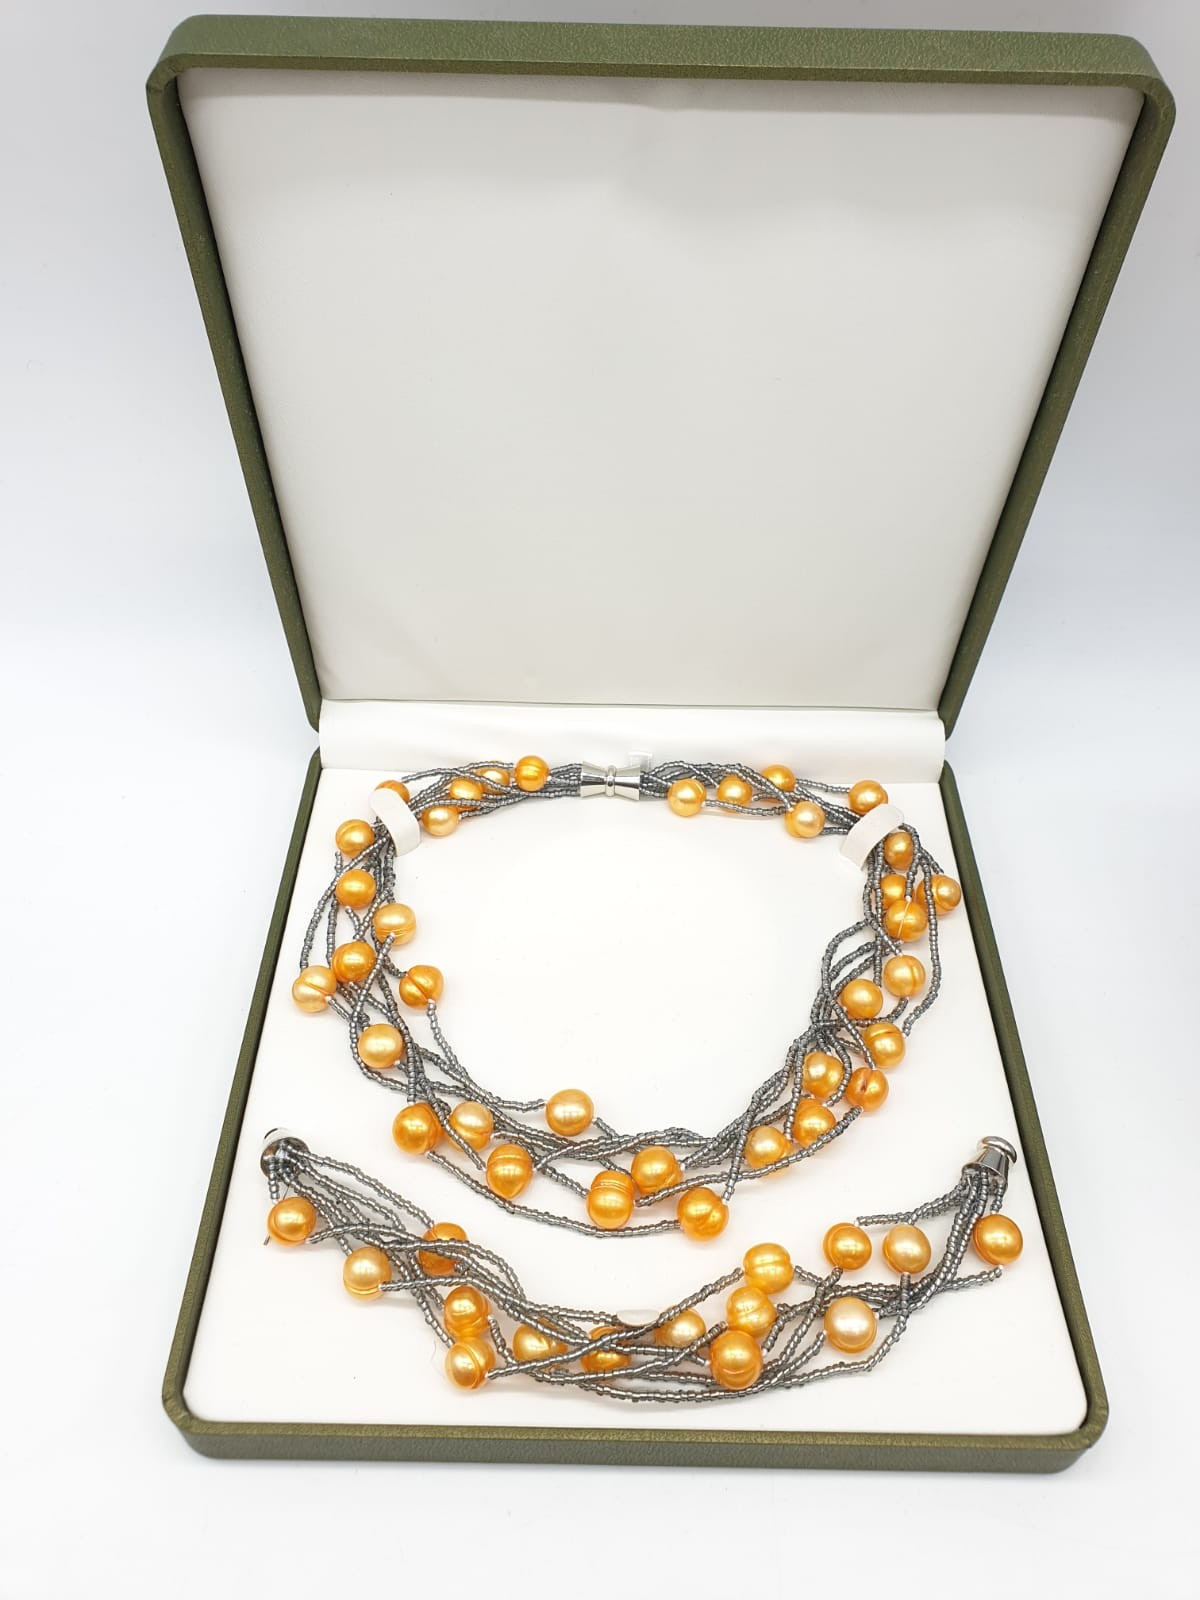 A very unusual necklace and bracelet set with large yellow-orange pearls. In a presentation box. - Image 3 of 3